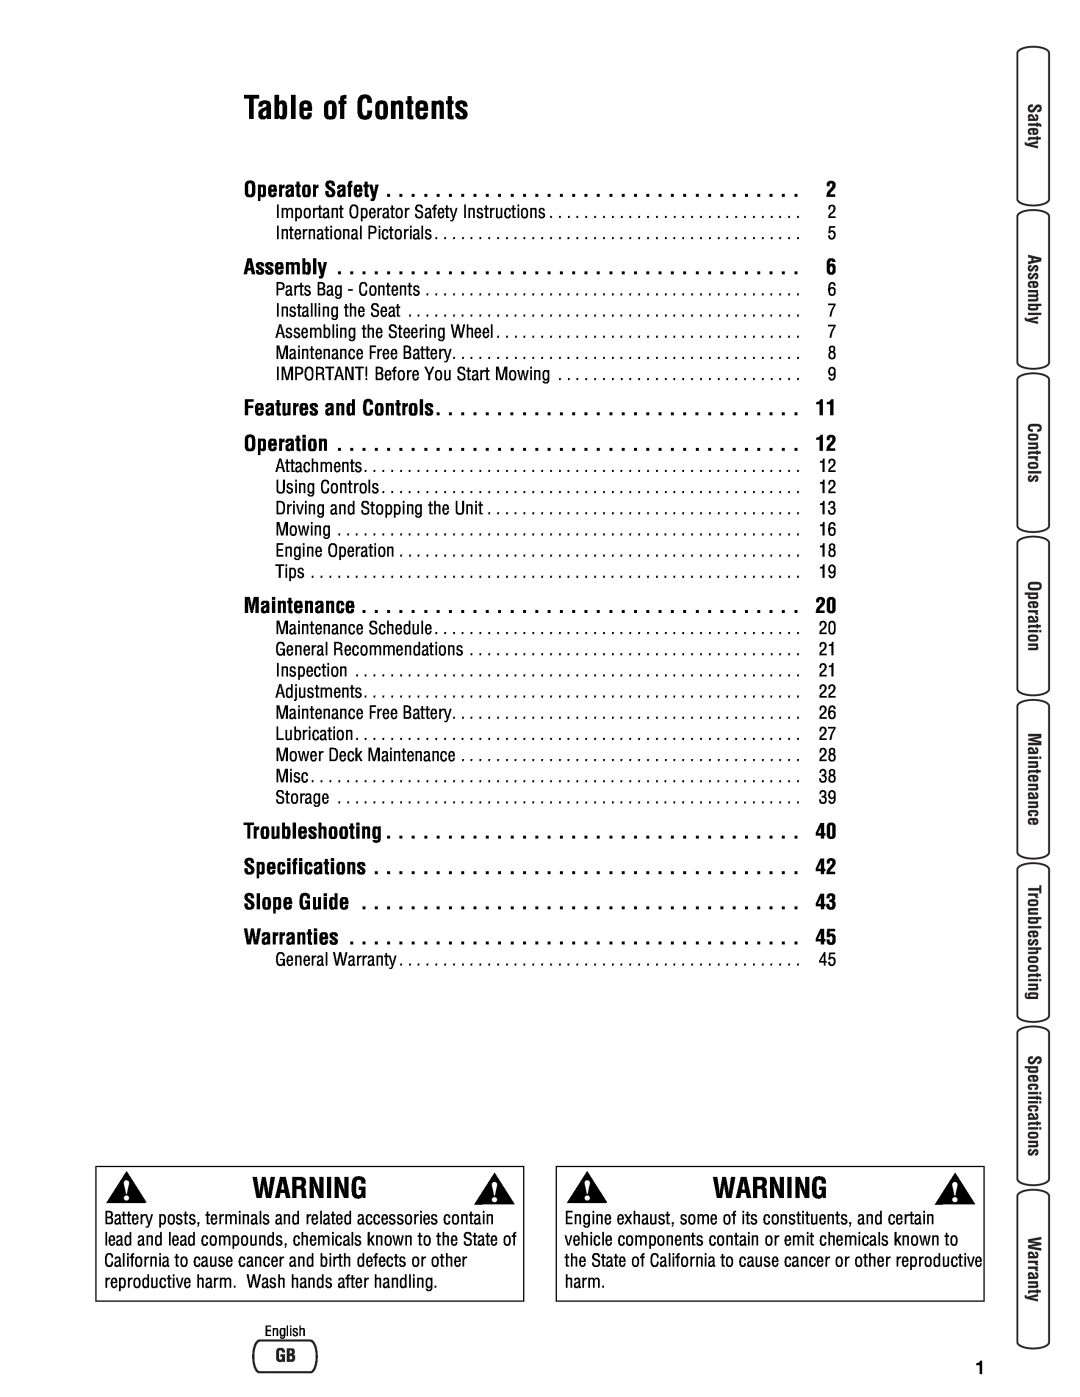 Snapper specifications Table of Contents 